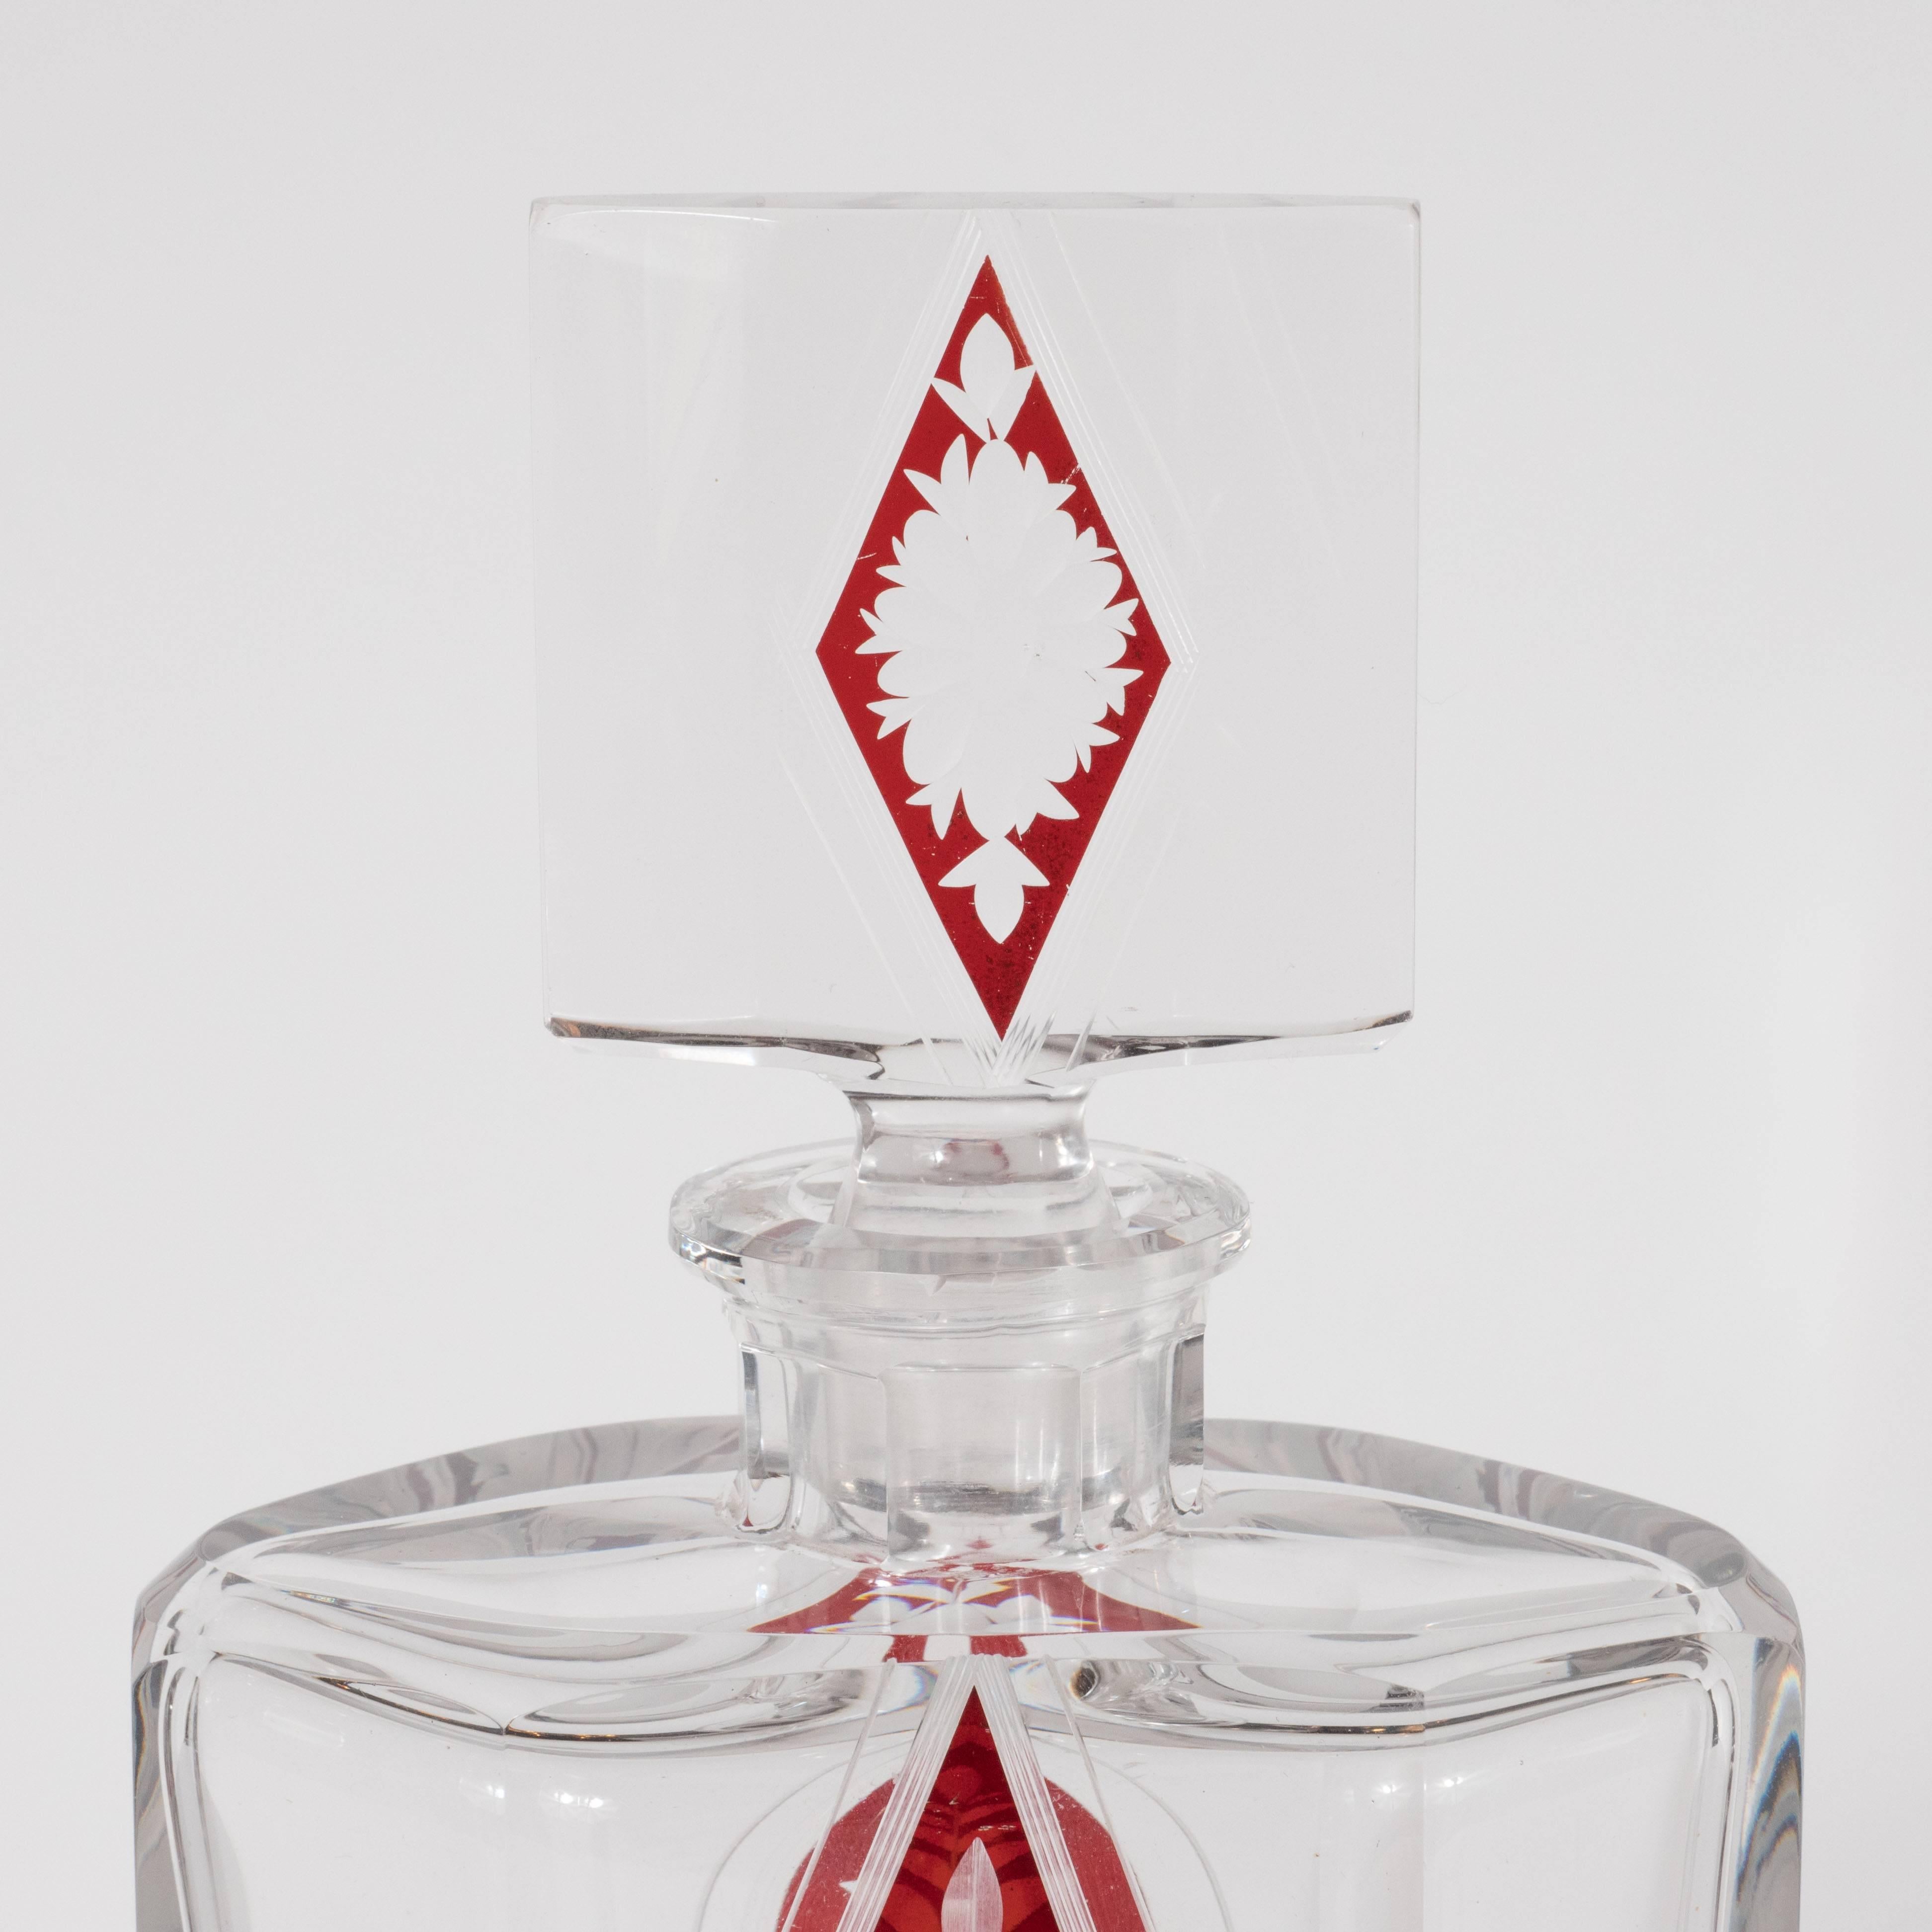 Art Deco Czech Crystal Decanter with Stained Cardinal Red Glass and Floral Motif 1